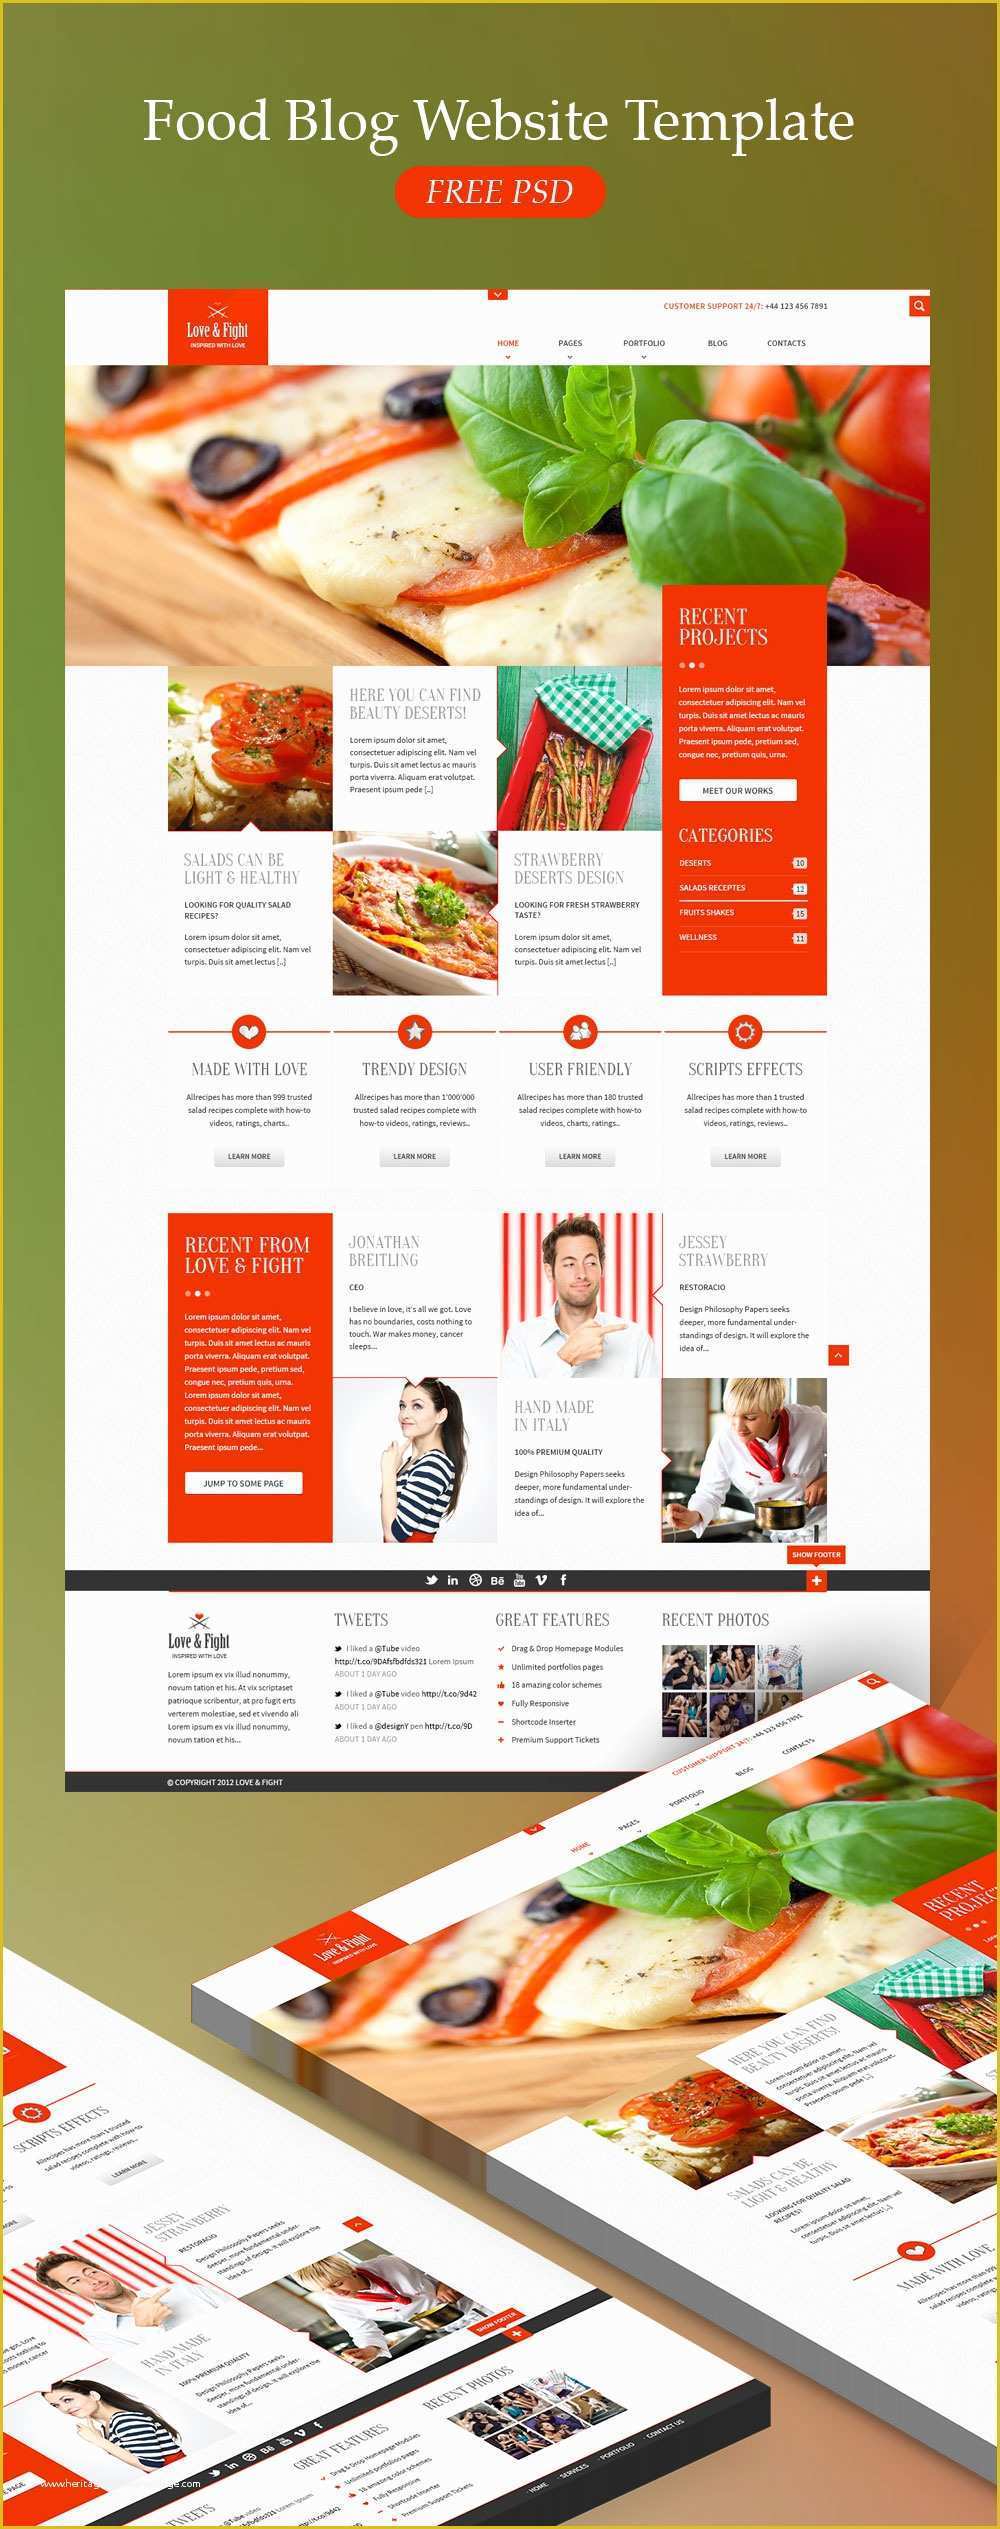 Cooking Website Templates Free Download Of Food Blog Website Template Free Psd Download Download Psd